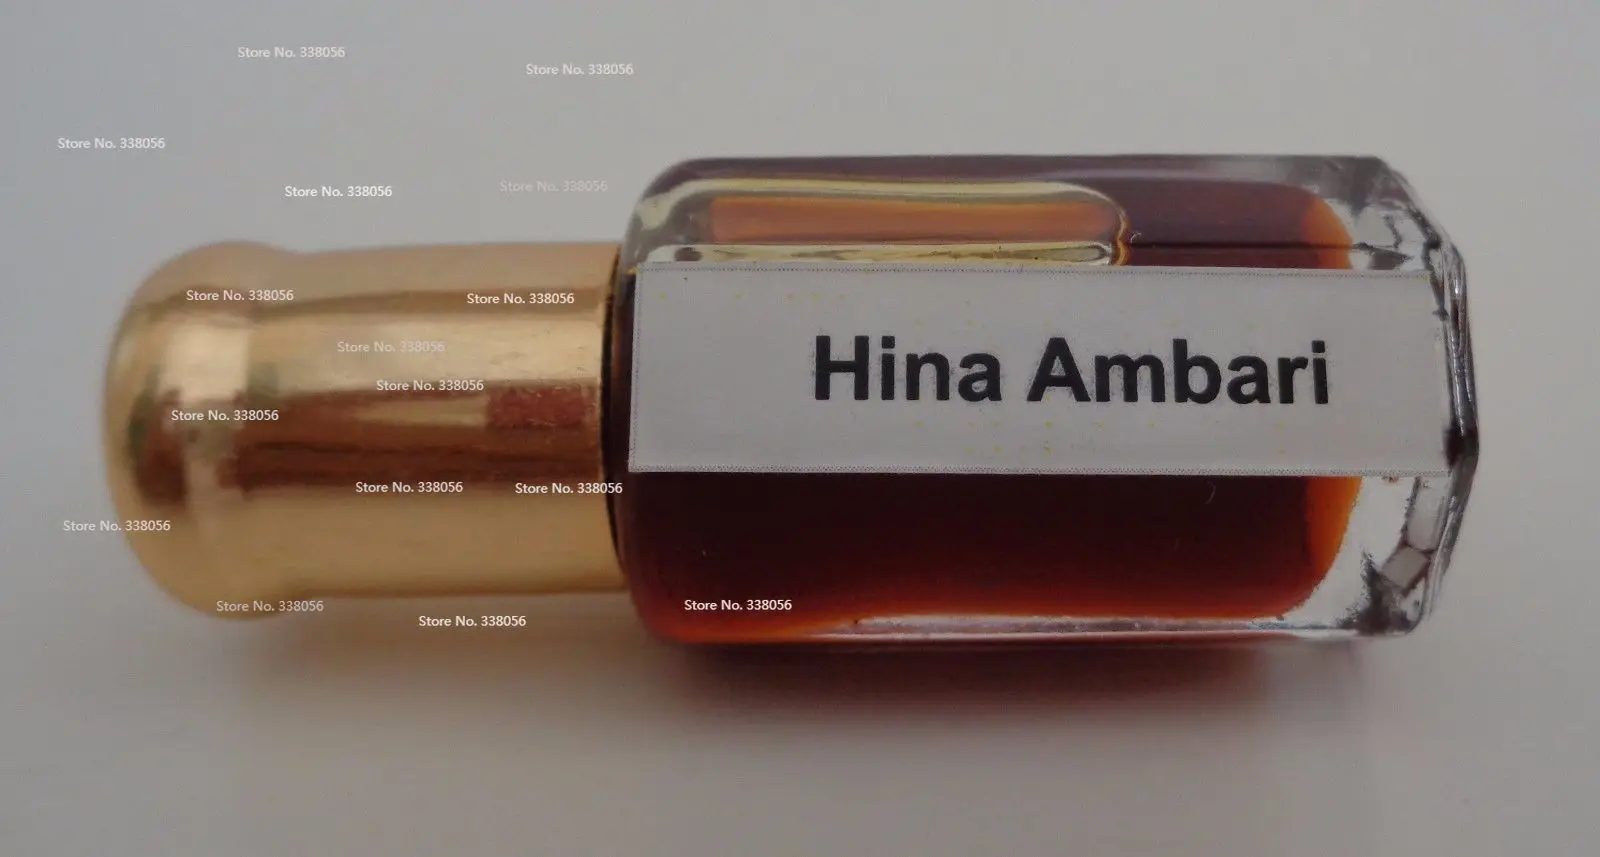 

Free Shipping India's Famous Traditional Attar 6ml Concentrated Hina Ambari Perfume Oil, Buy 2 Get 1 Free